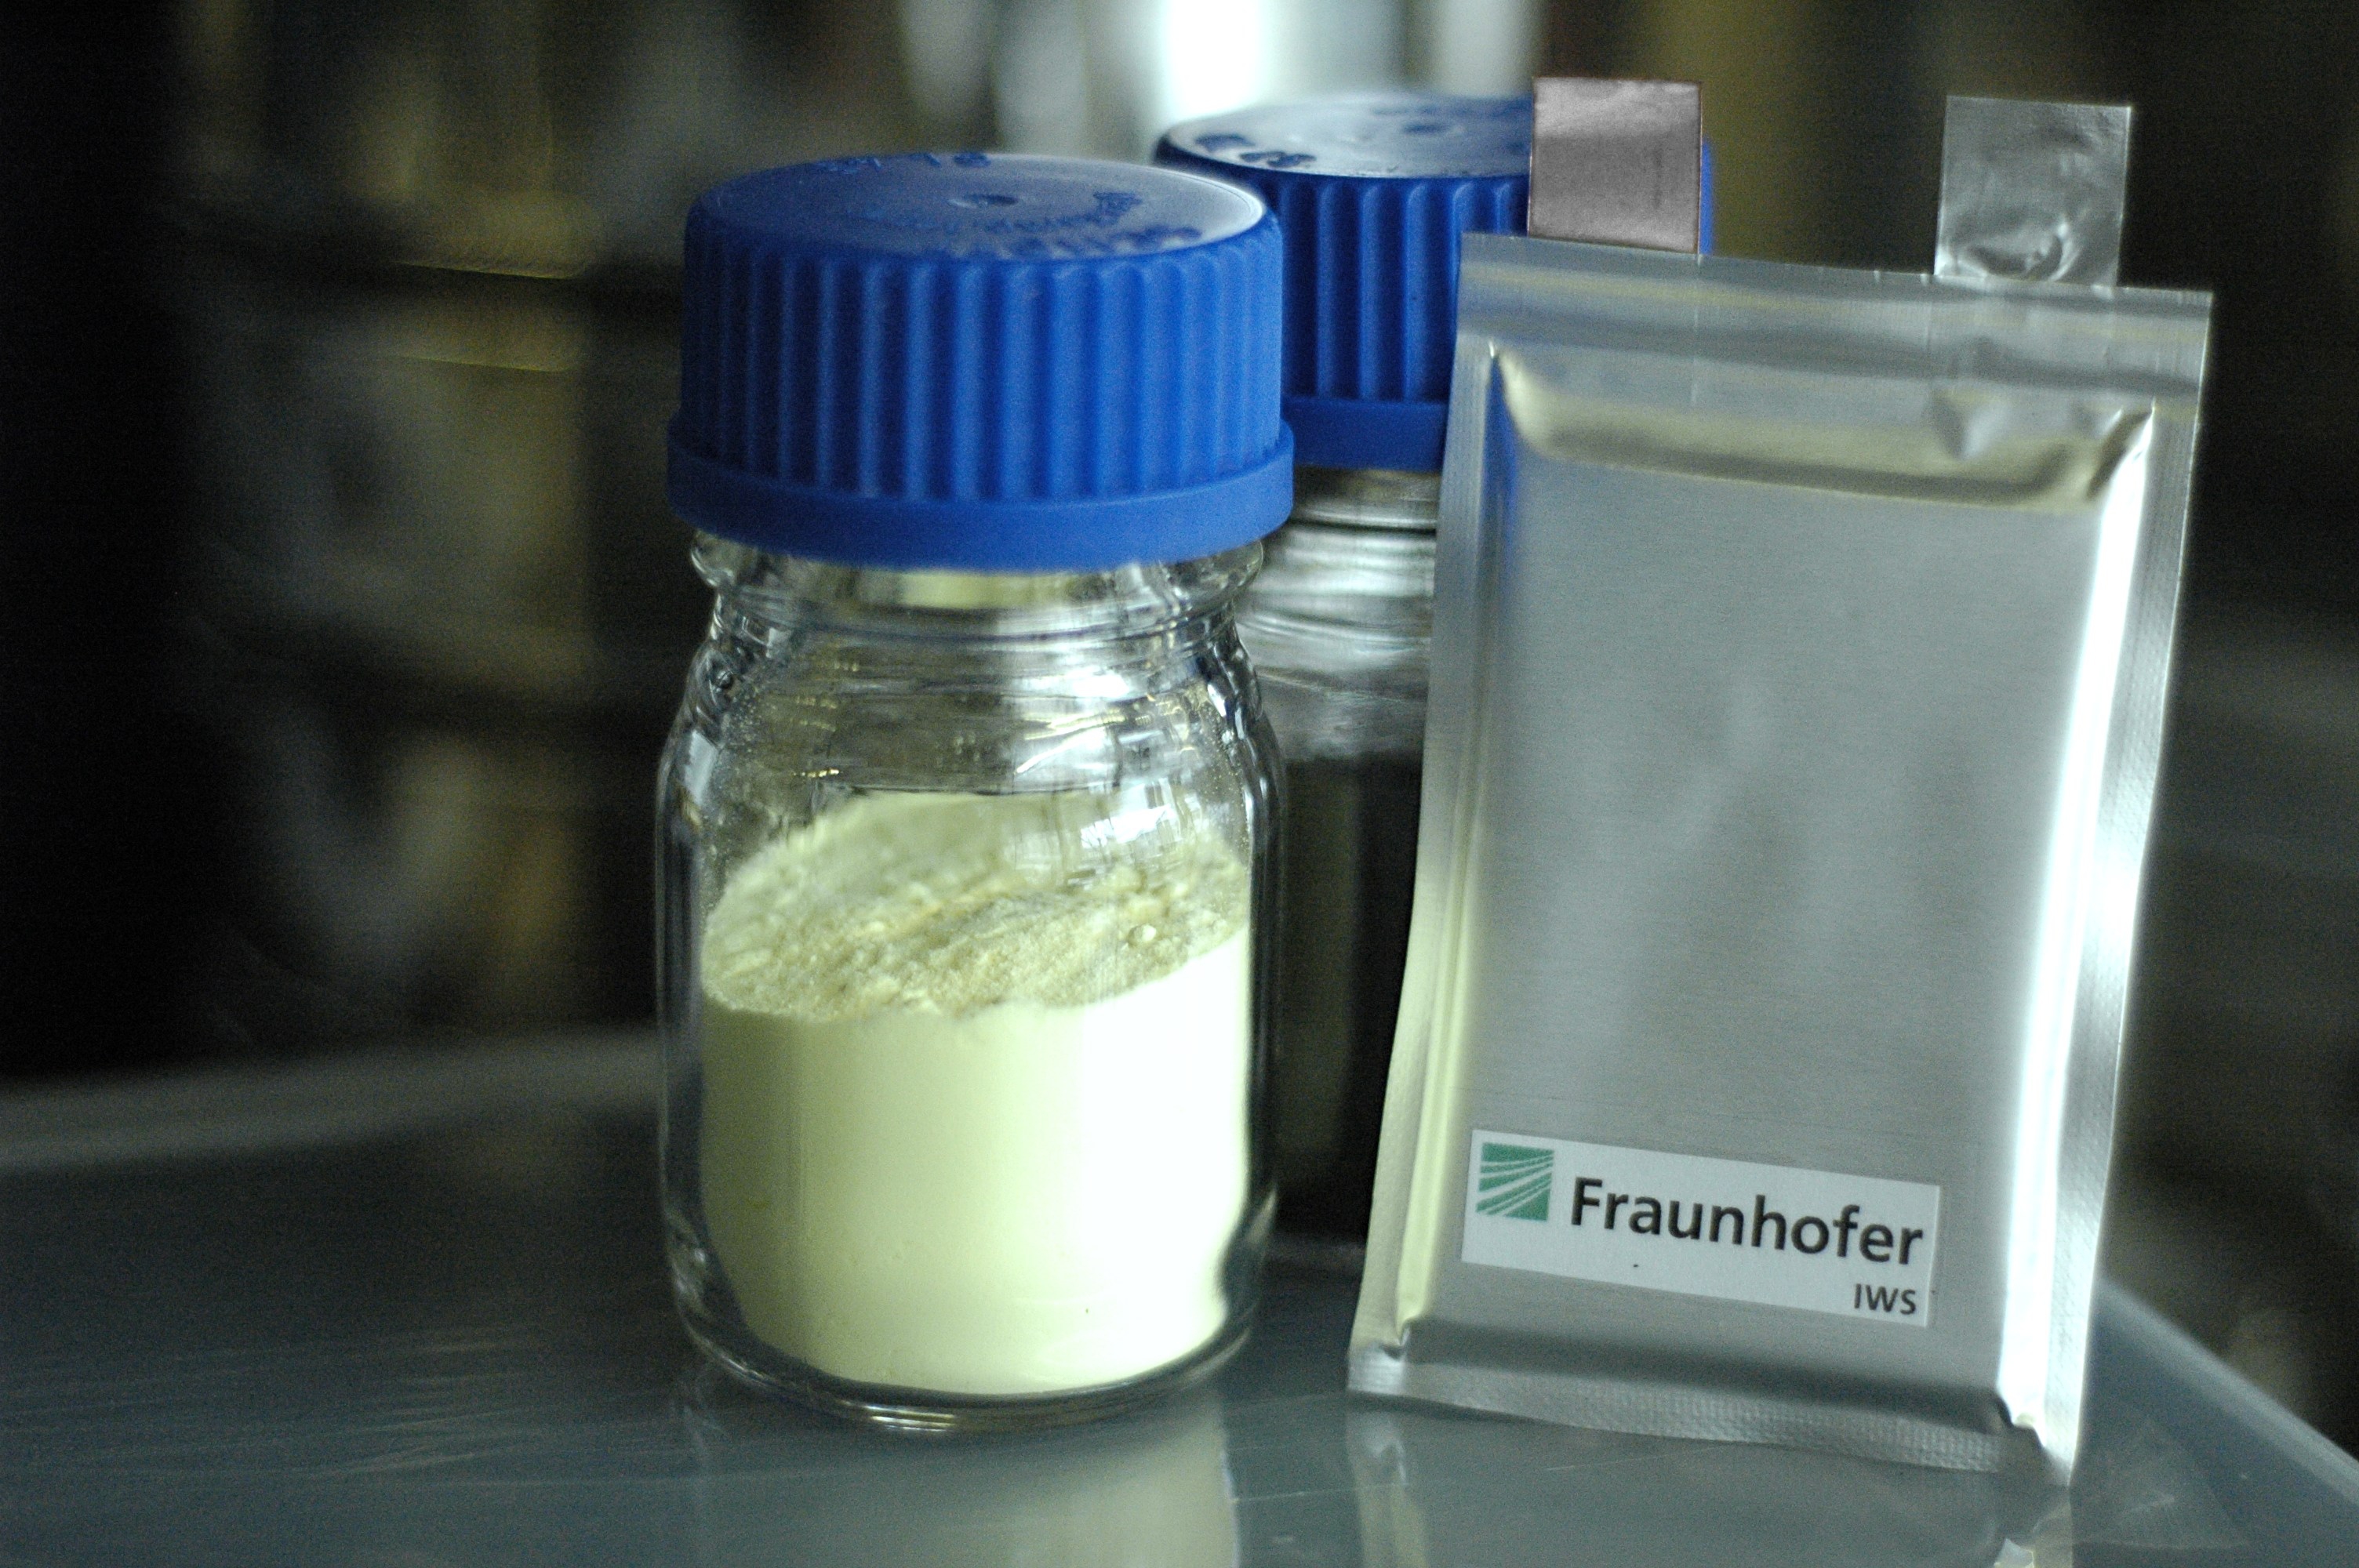 Prototypes of next-generation battery cells are being developed at Fraunhofer IWS. In the “MaLiBa” project scientists use generic lithium anode technology for lithium-sulfur batteries with high volumetric energy density. 